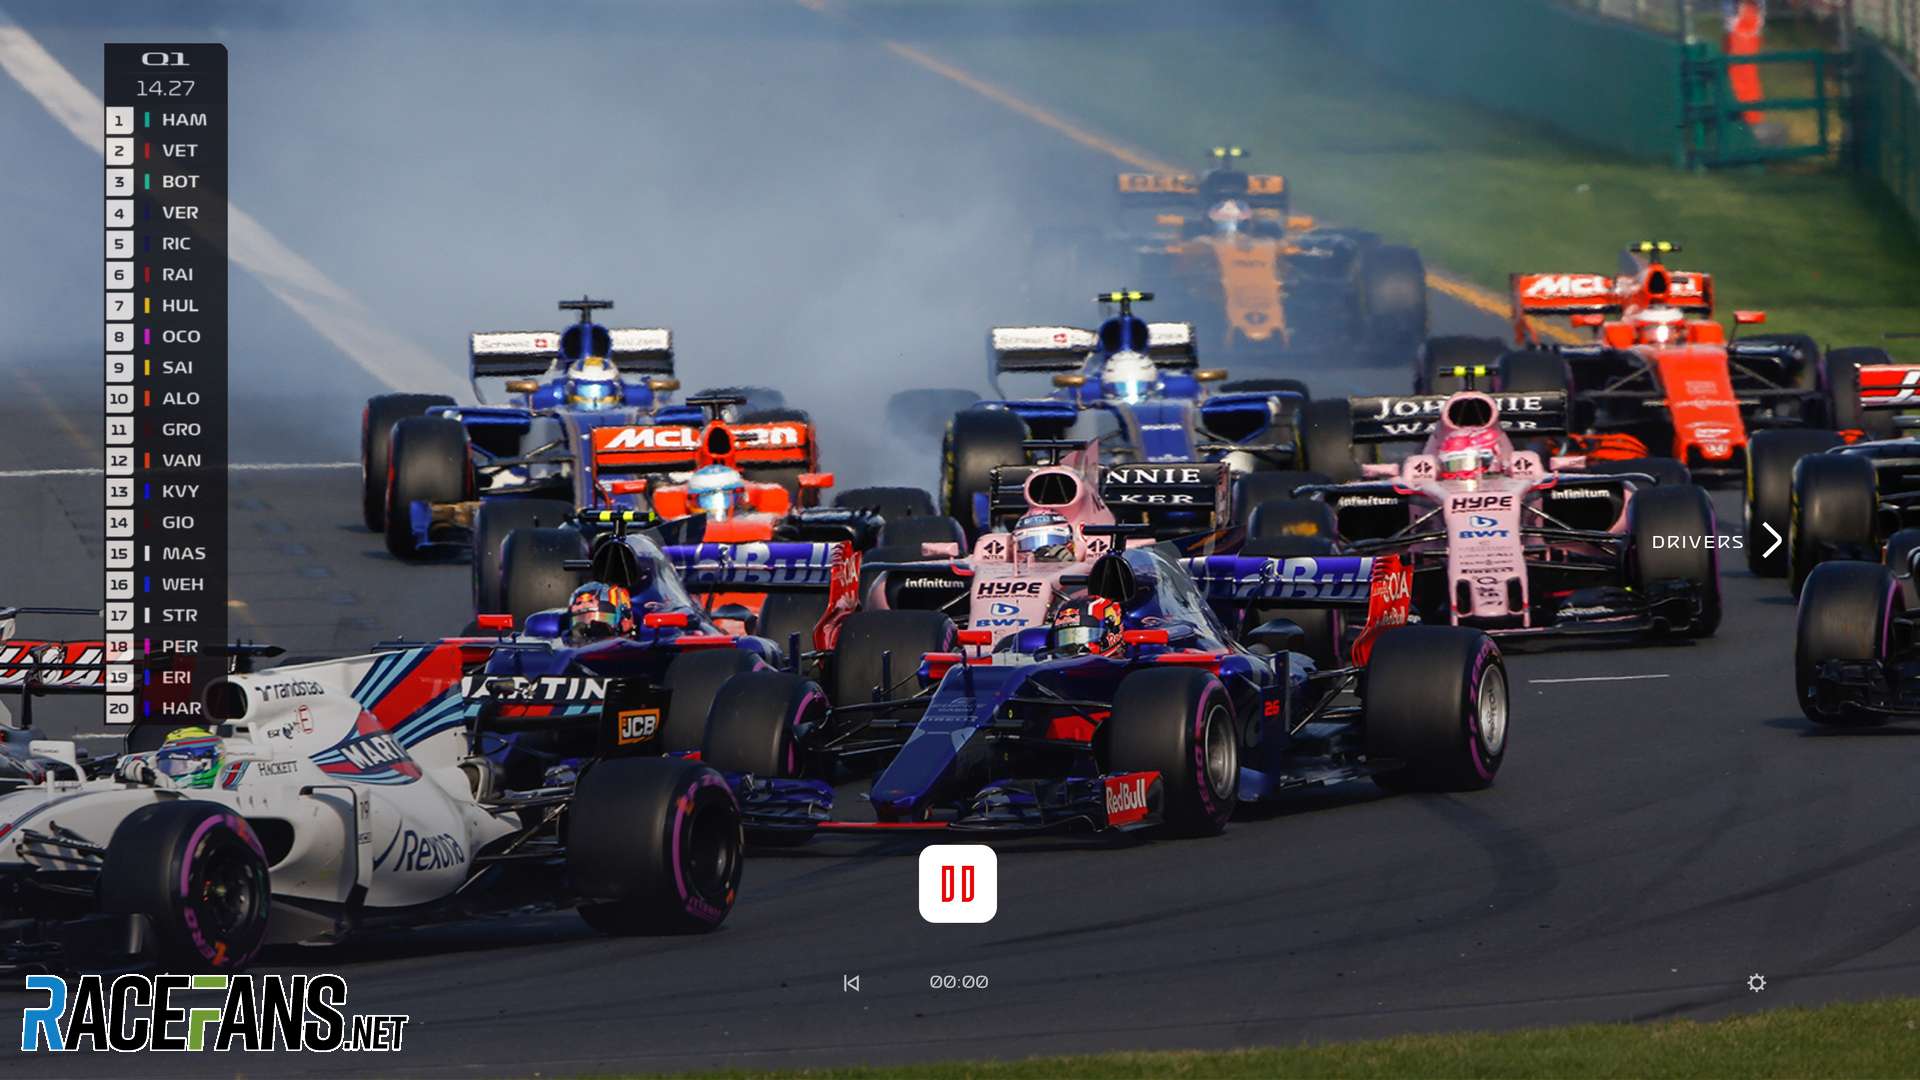 F1 TV streaming service